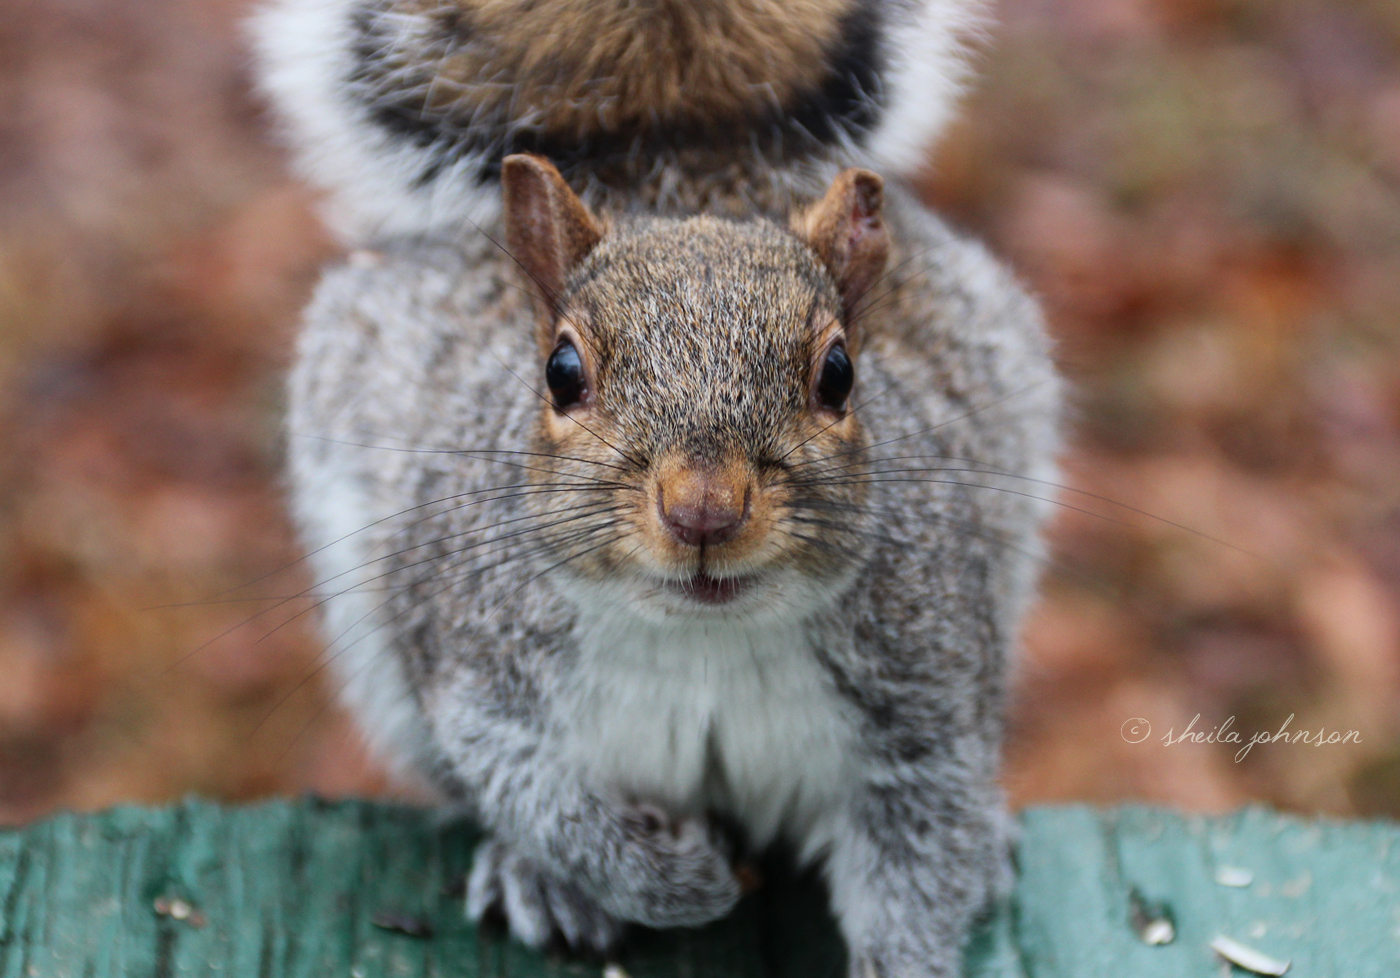 The Squirrels At Mariner Point Park, Joppa, Maryland, Are Shameless, And Many Park Patrons Bring Bags Of Nuts For The Sole Purpose Of Feeding These Little Cuties.